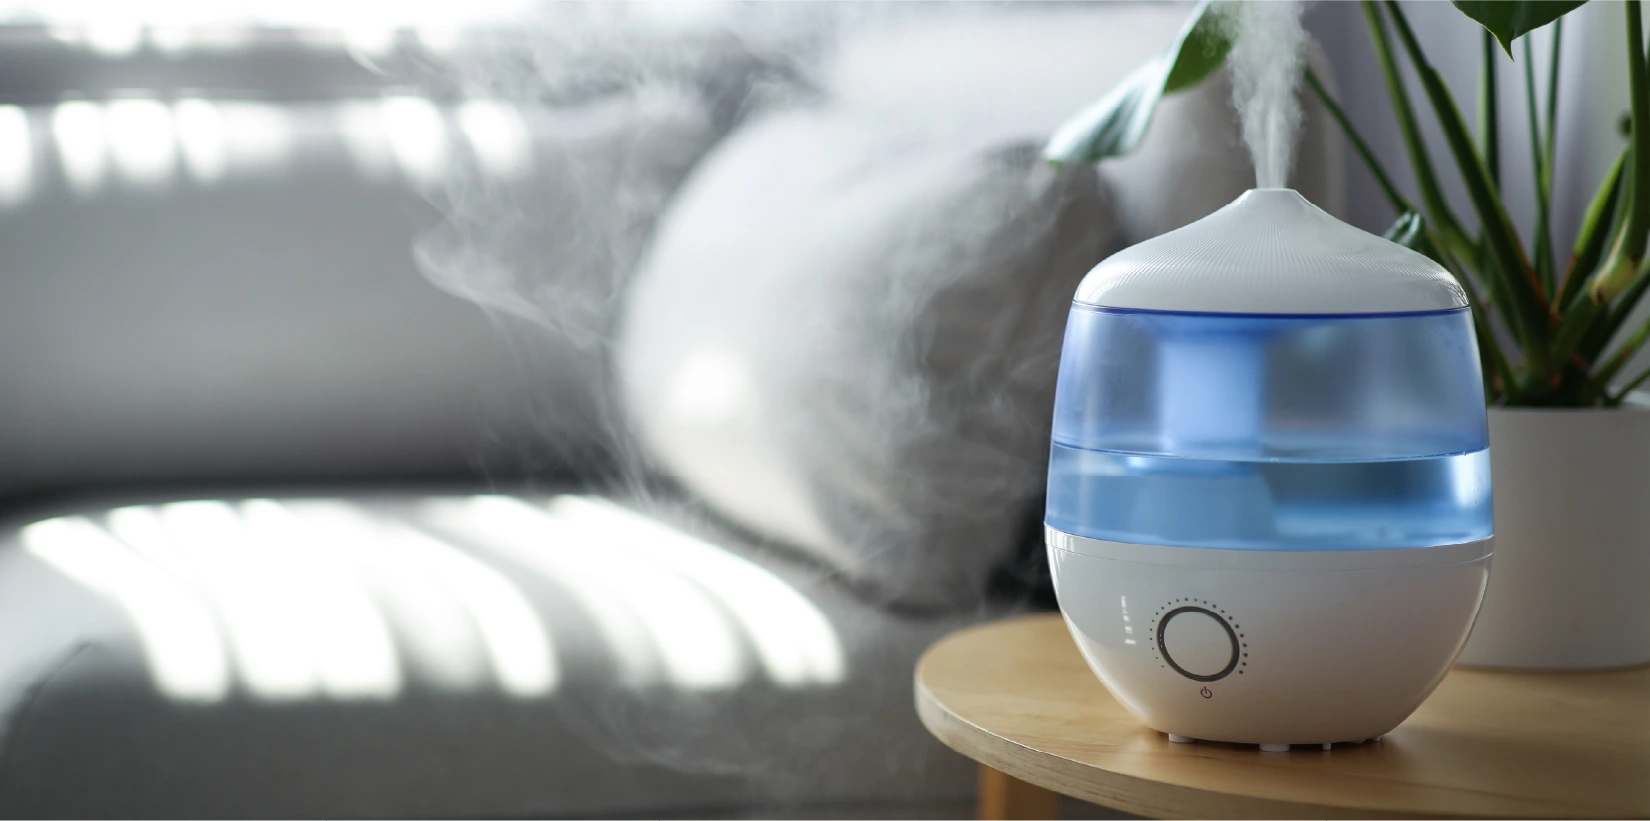 A white and blue humidifier sits on top of a wooden coffee table in a living room.